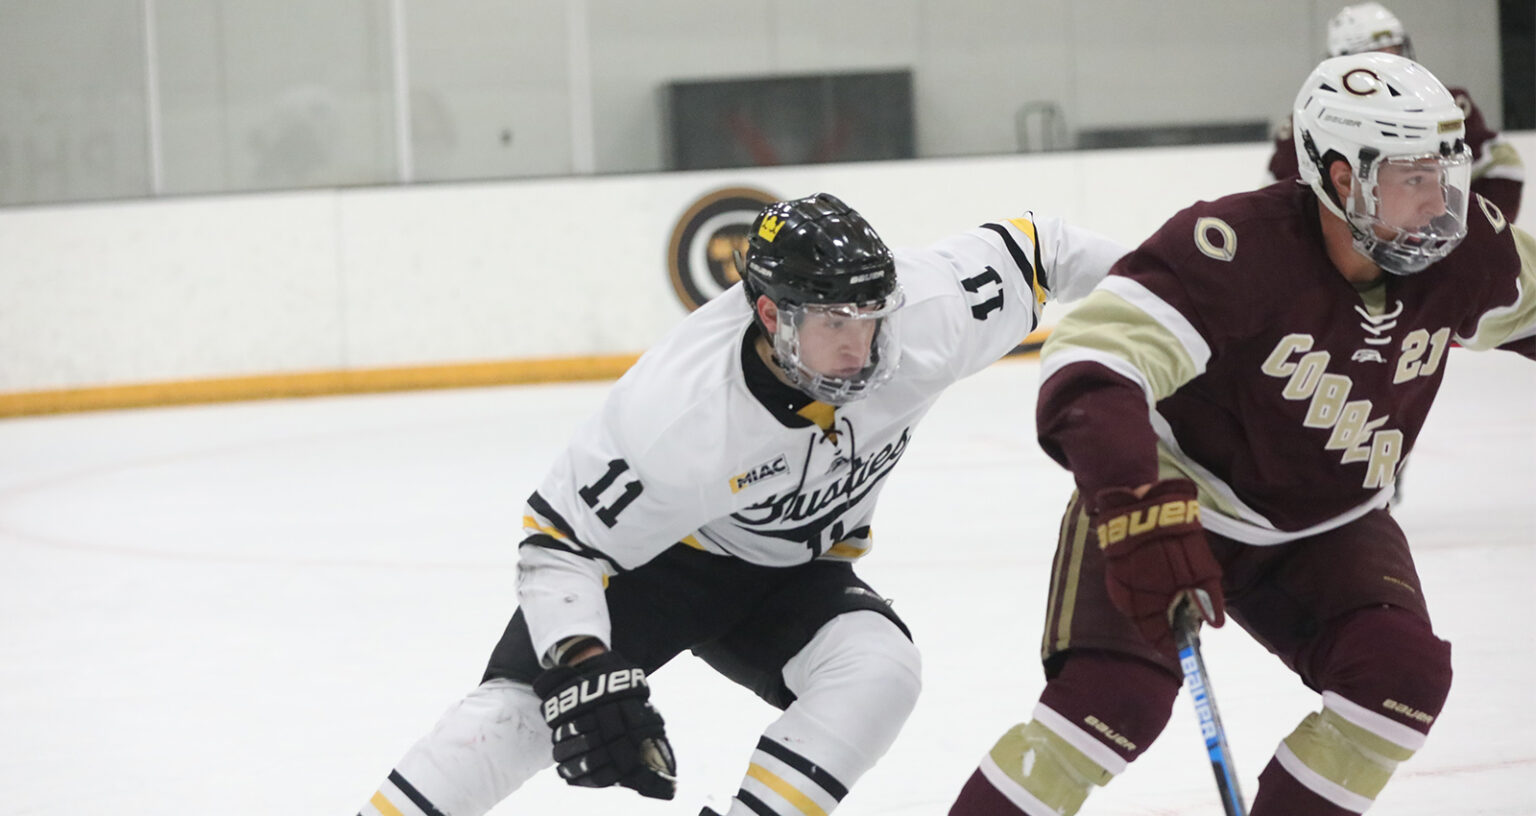 Men’s Hockey Swept By Concordia - Posted on January 22nd, 2022 by